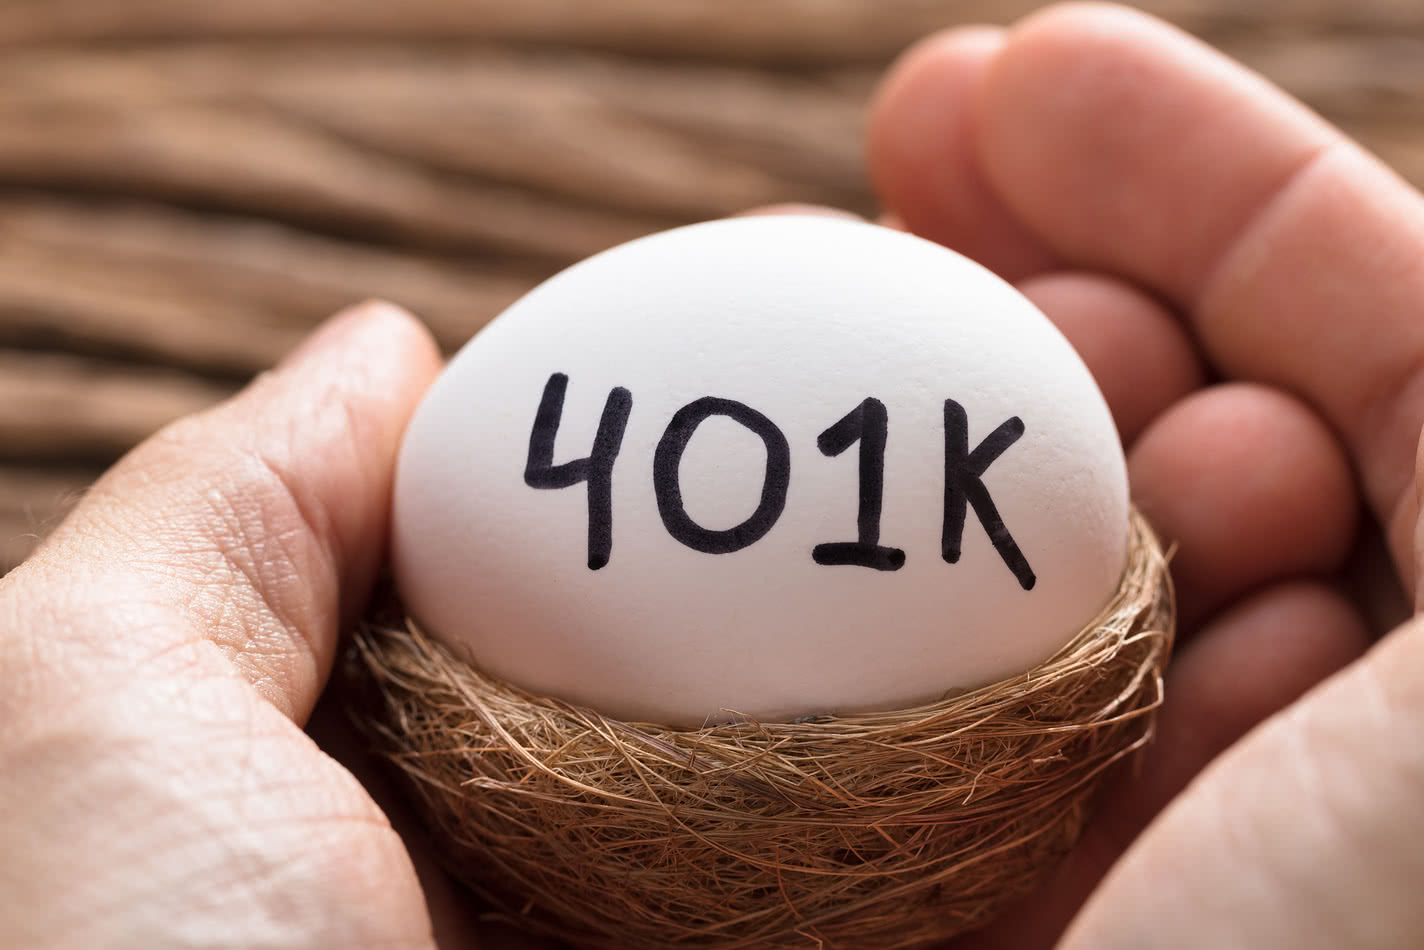 Small business owners should think about their own retirement savings accounts.